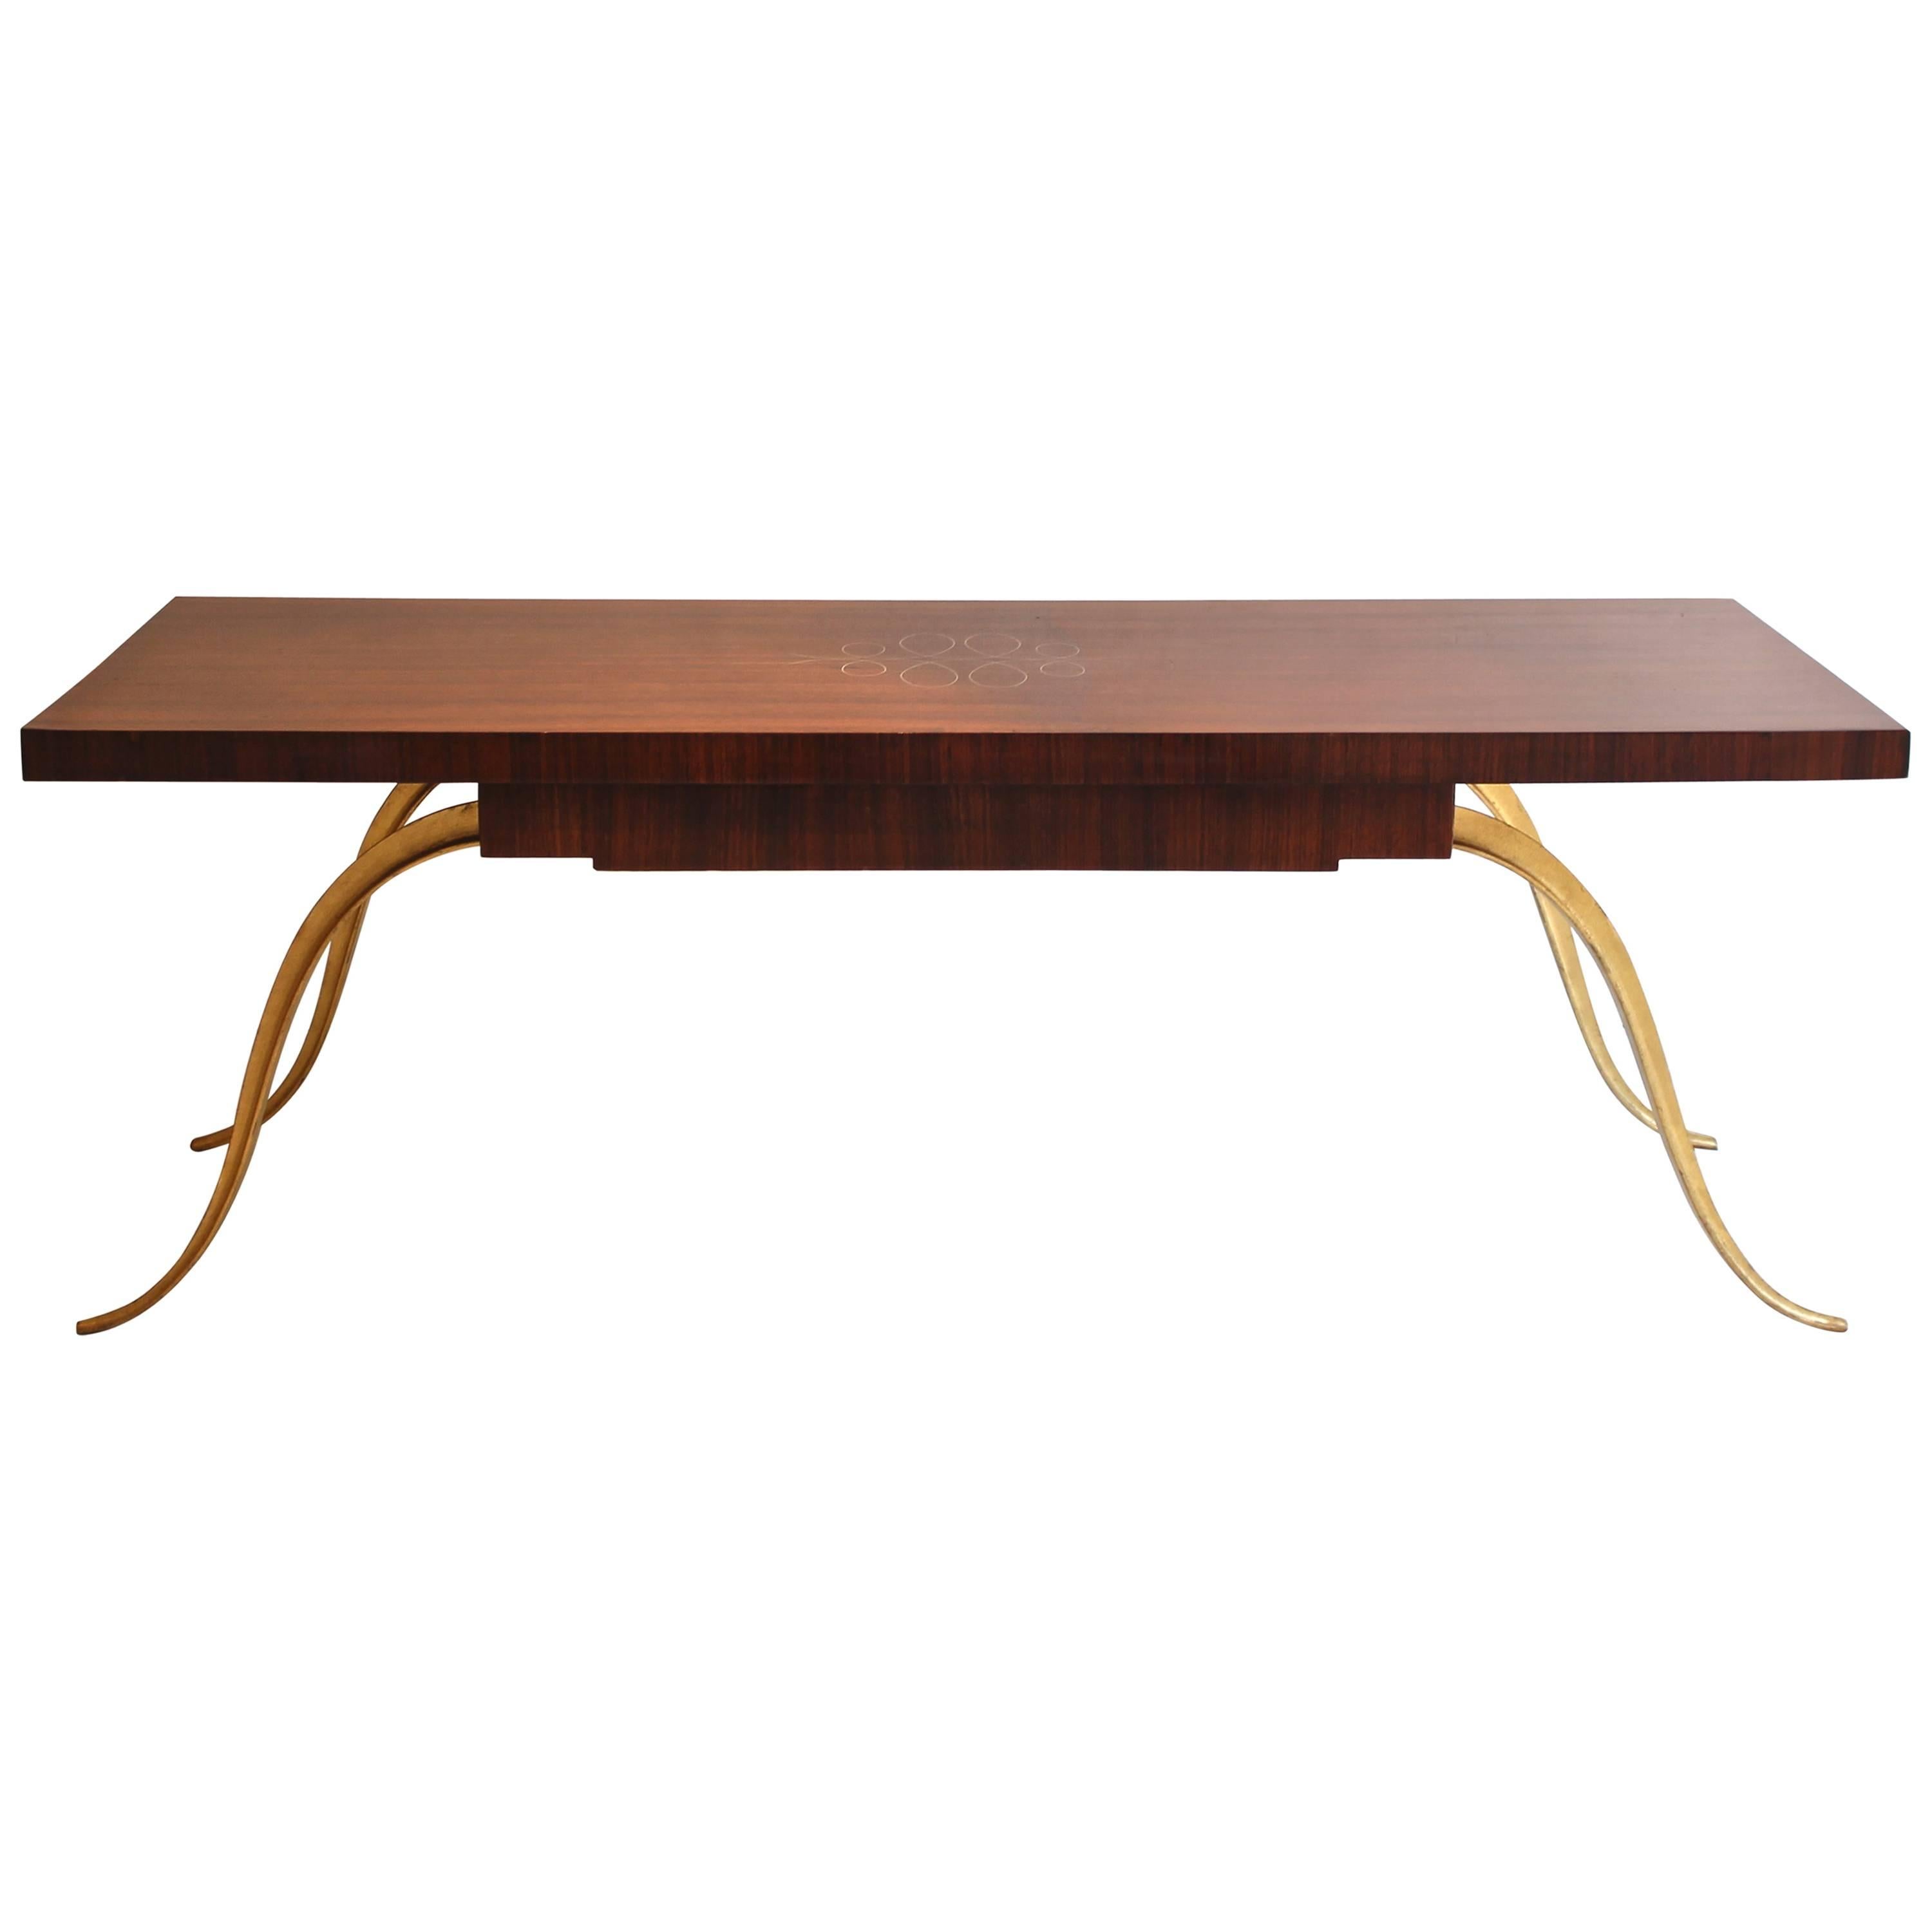 1930s French Art Deco Coffee Table, in Rosewood and Bone Marquetry